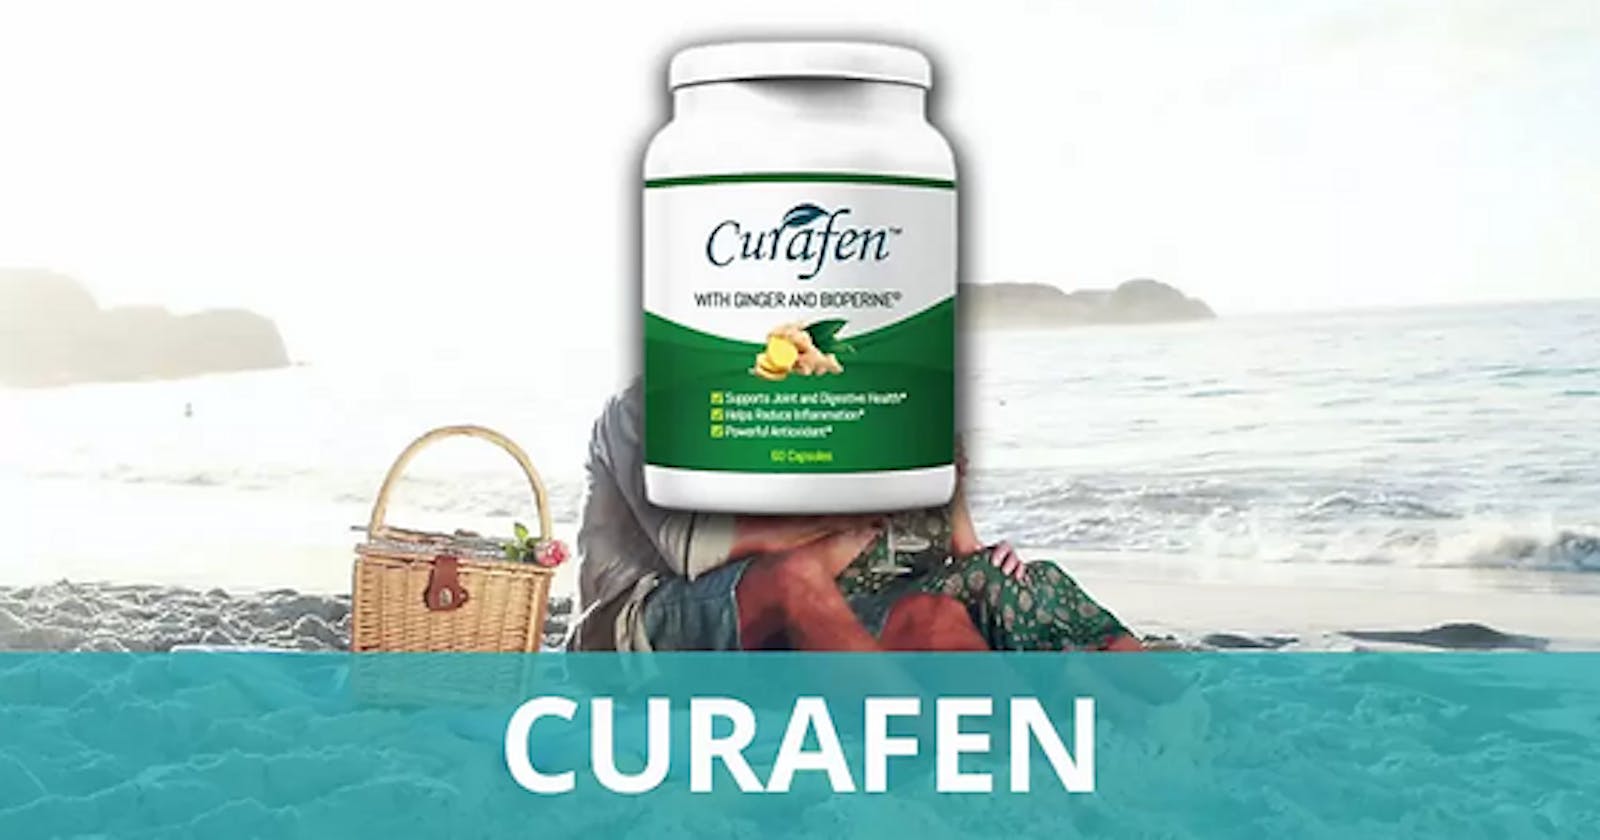 Curafen -Hoax or Legit? Must Read Reviews & Cost! (United States & CA)